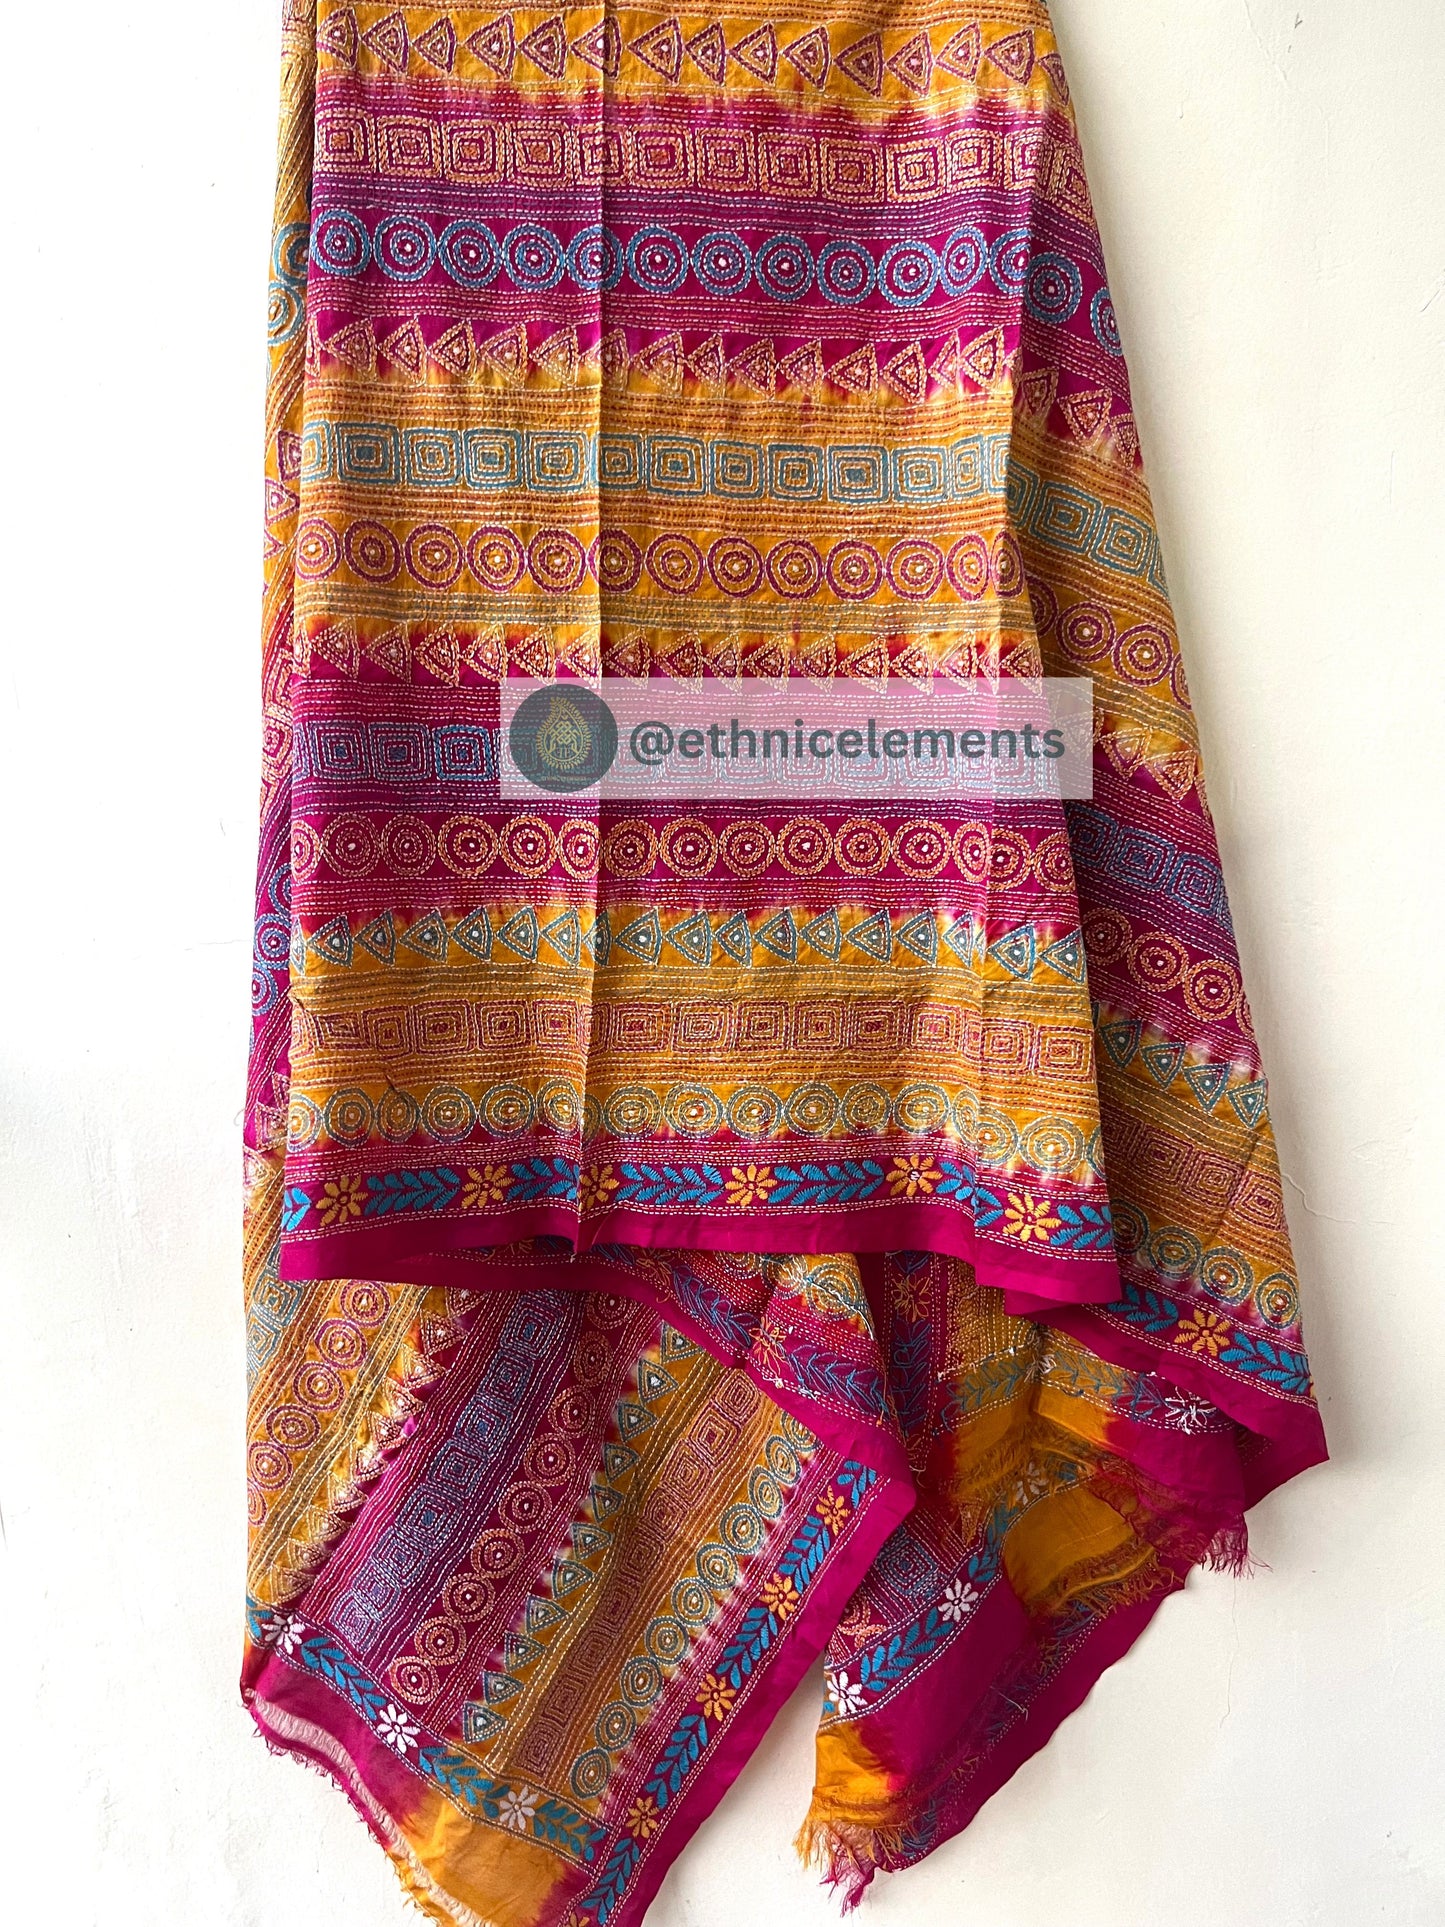 Tussar Silk Dupatta With Kantha Embroidery - Marigold Look